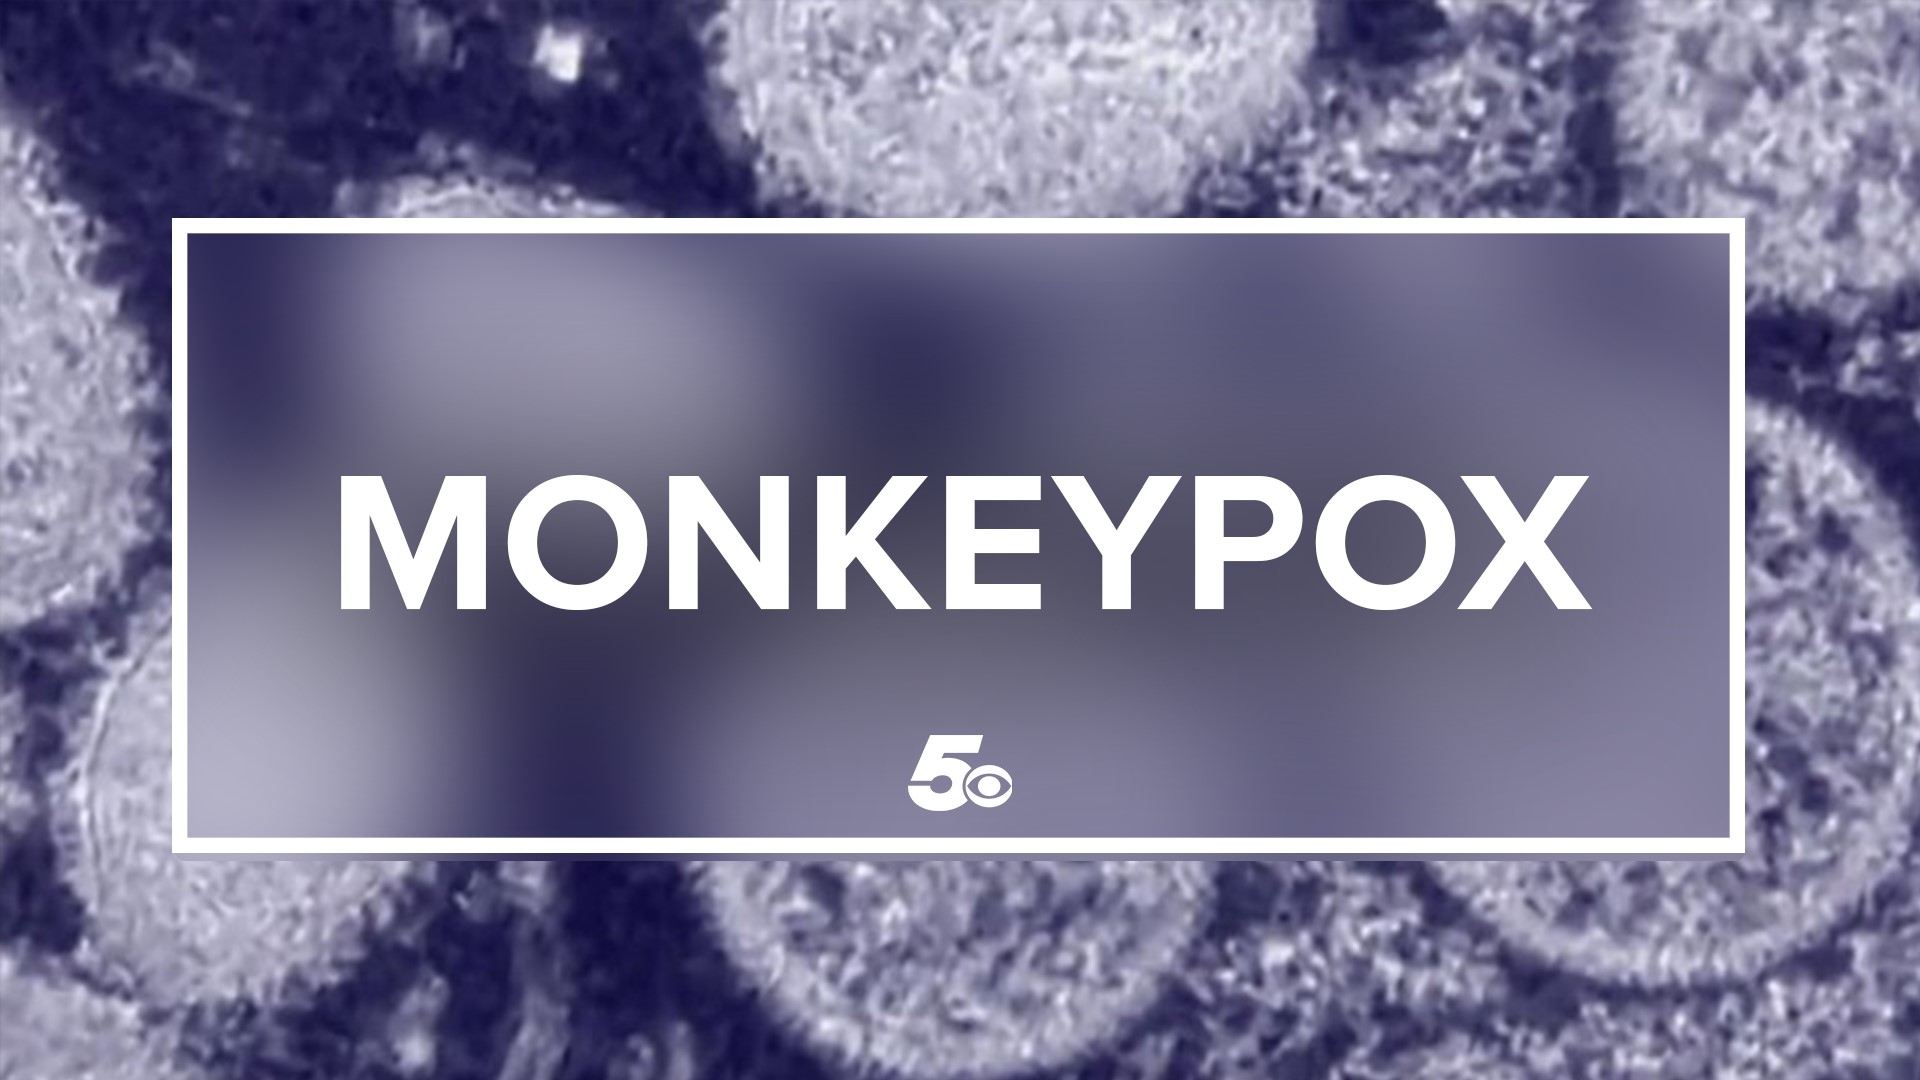 Health officials say monkeypox is in the same family of viruses as Smallpox but it is less contagious and not anywhere near as deadly.